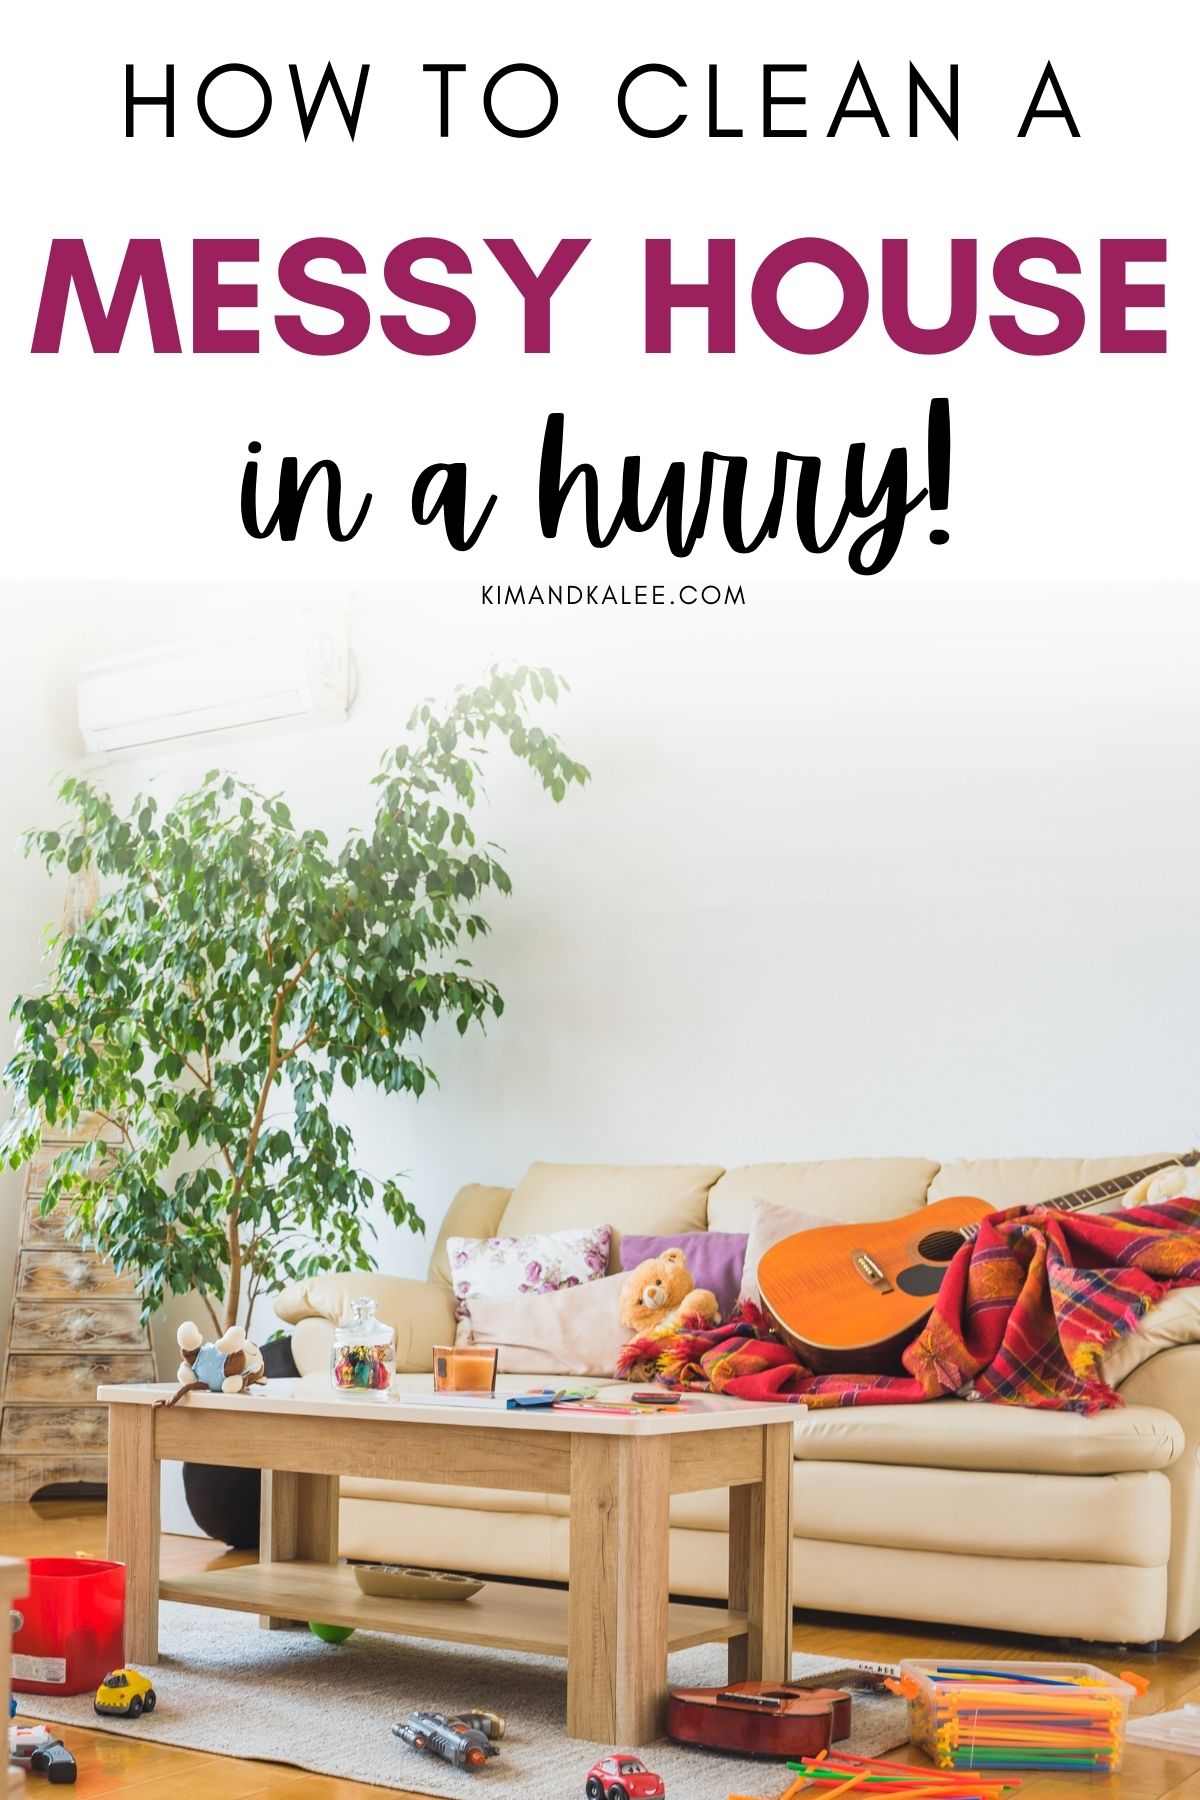 a messy living room with the text overlay "how to clean a messy house in a hurry"